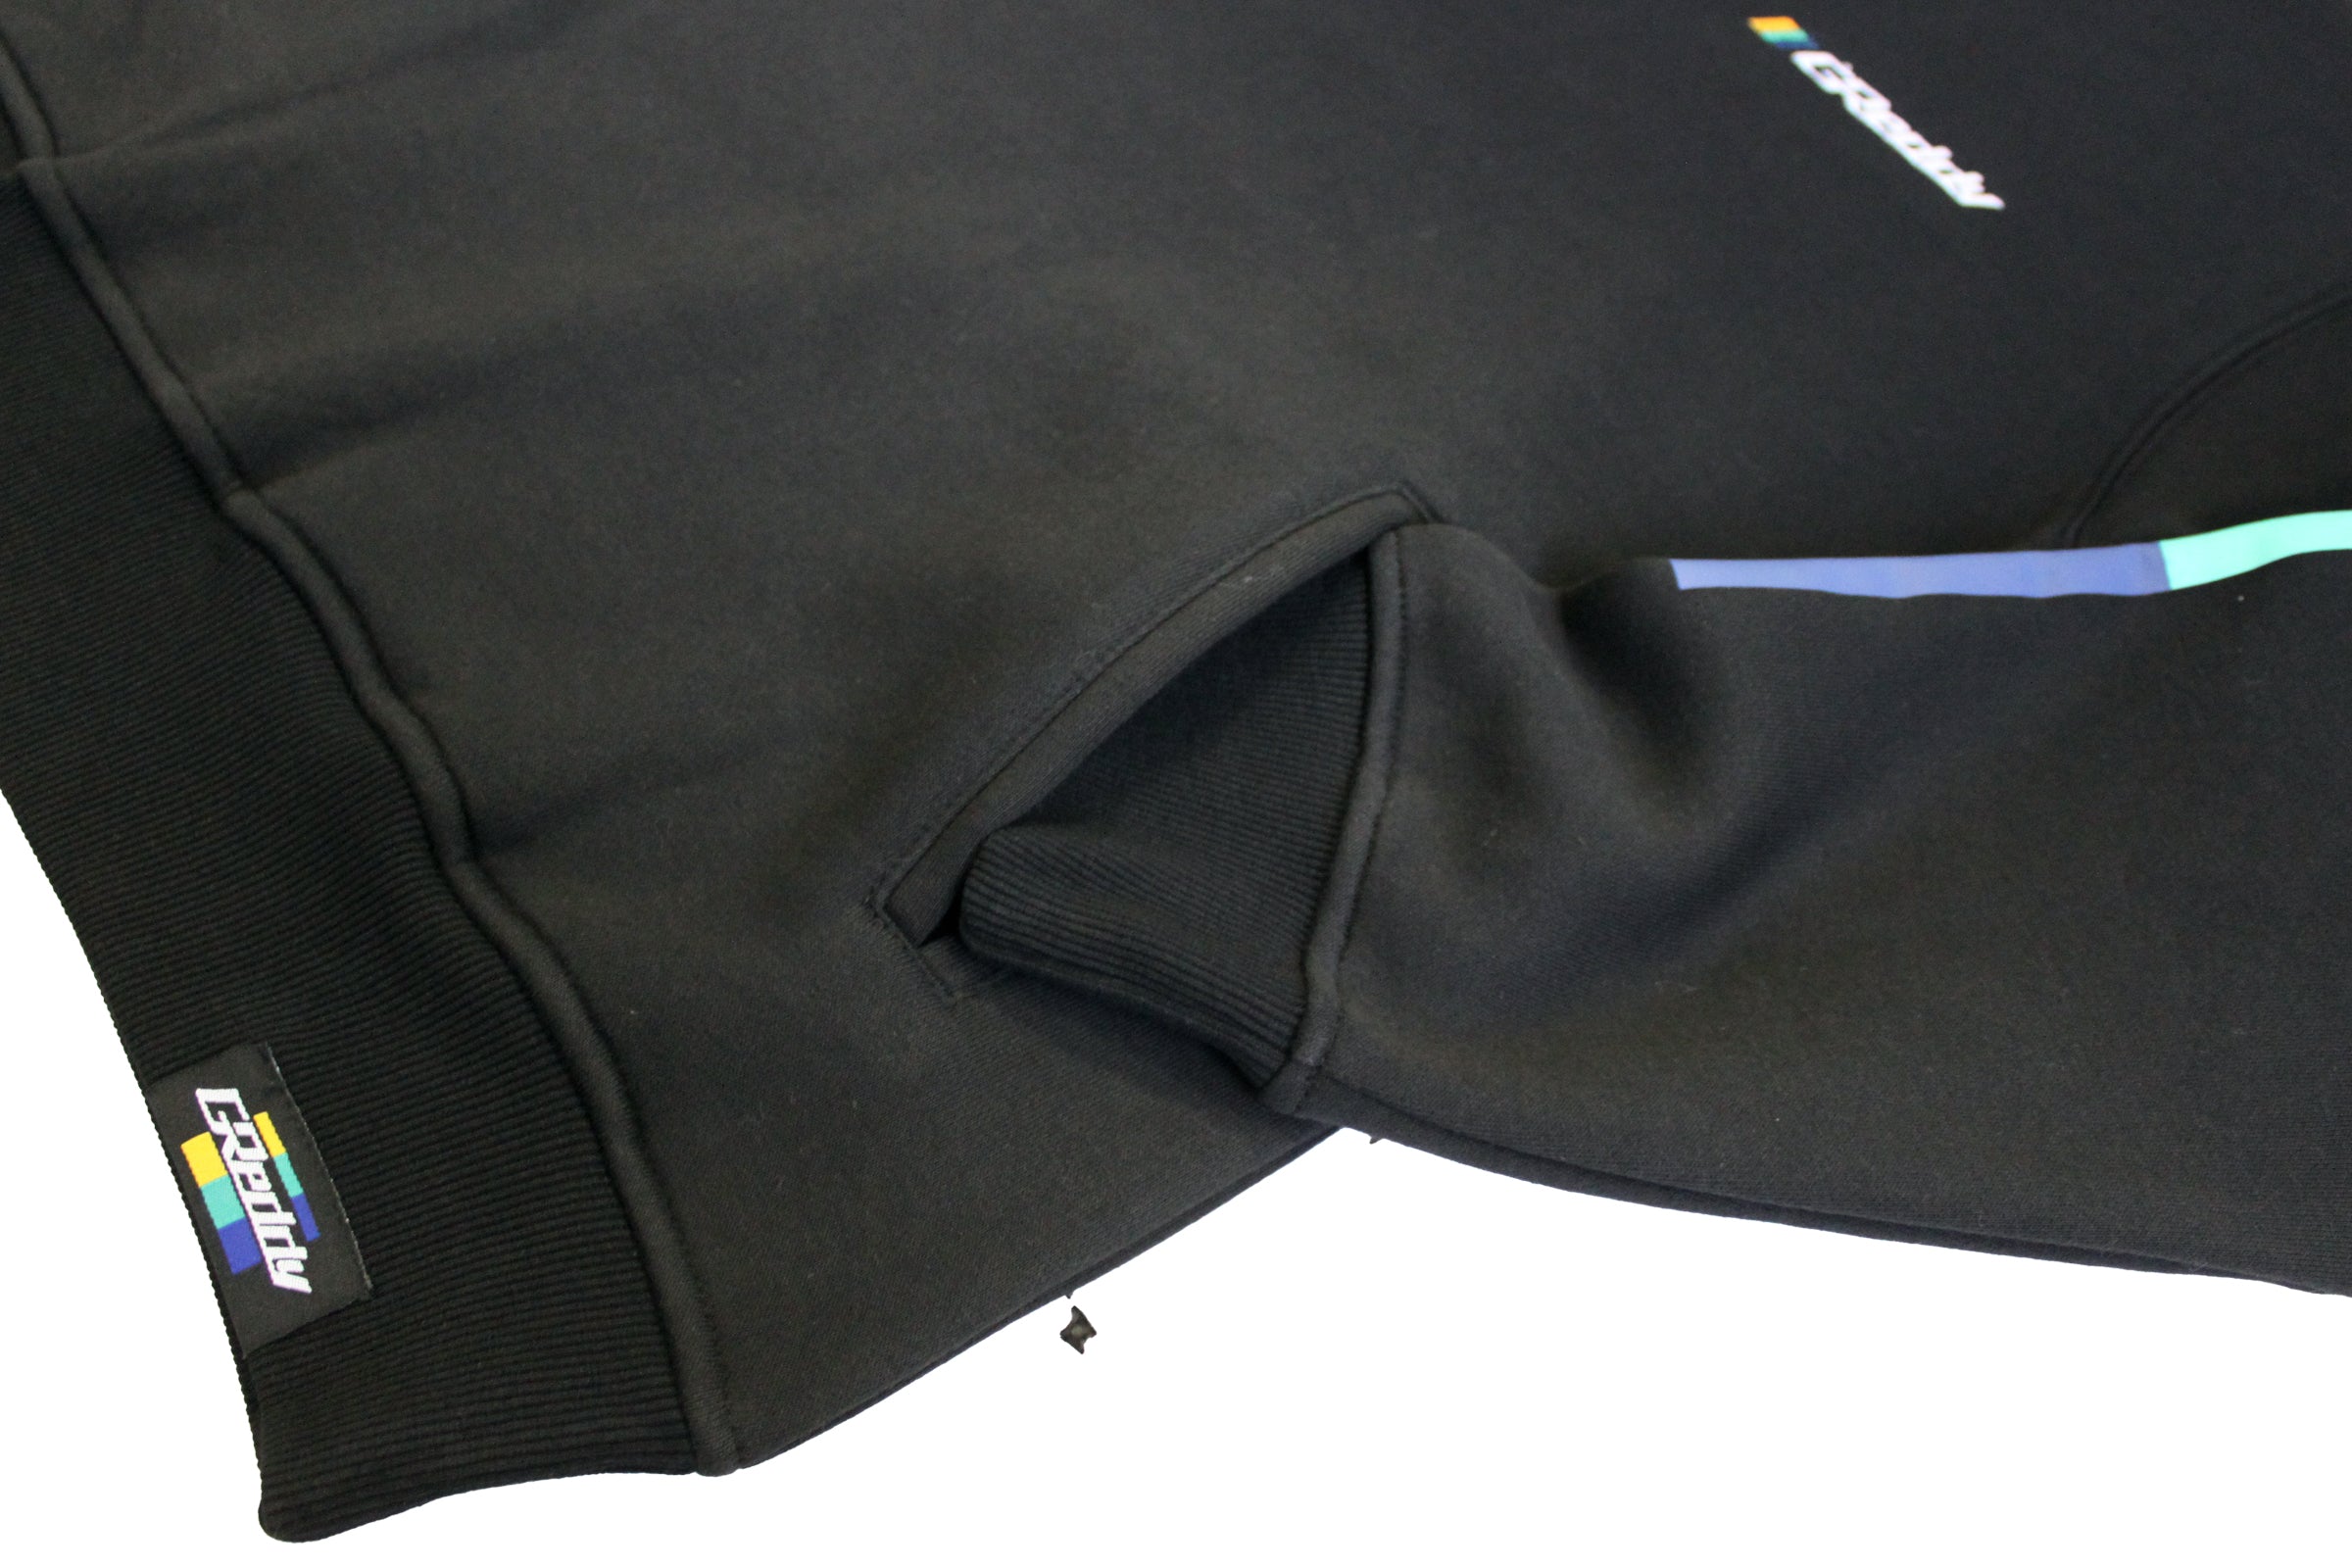 GReddy Embroidered Fleece, with Pockets and Sleeve stripes - Black